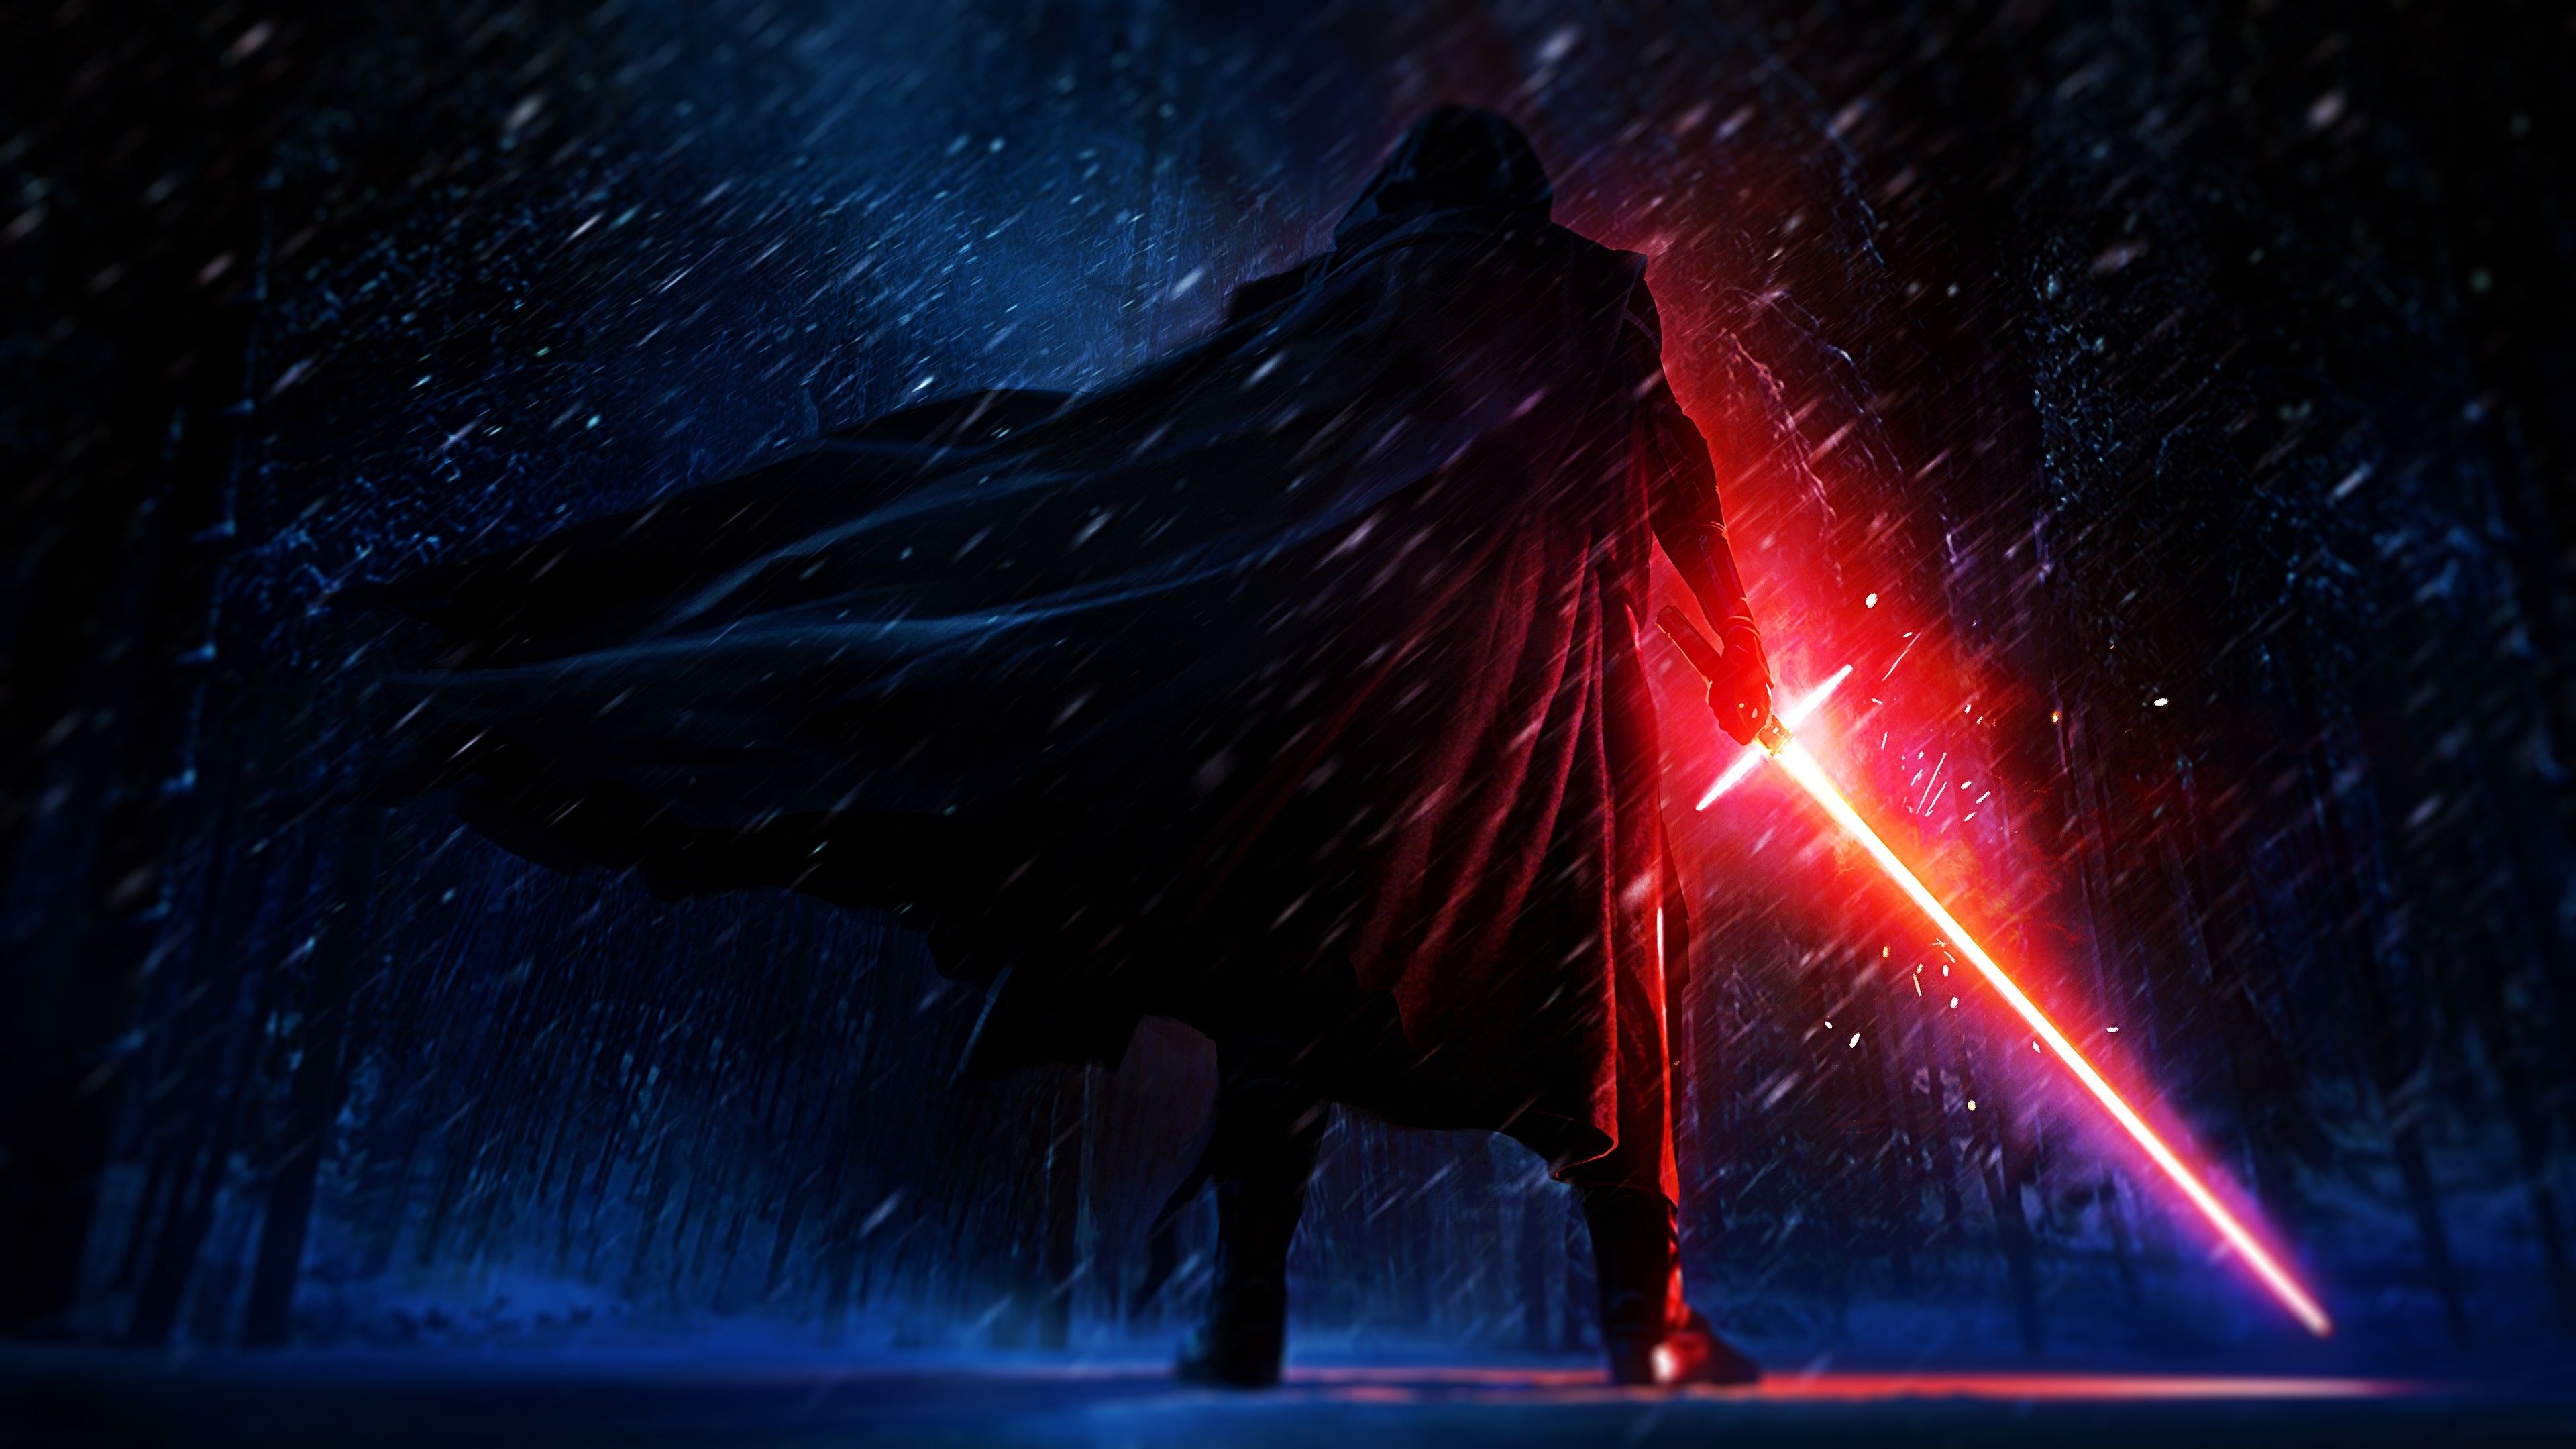 Sith: An ancient religious order of Force-wielders devoted to the dark side of the Force. 3840x2160 4K Background.